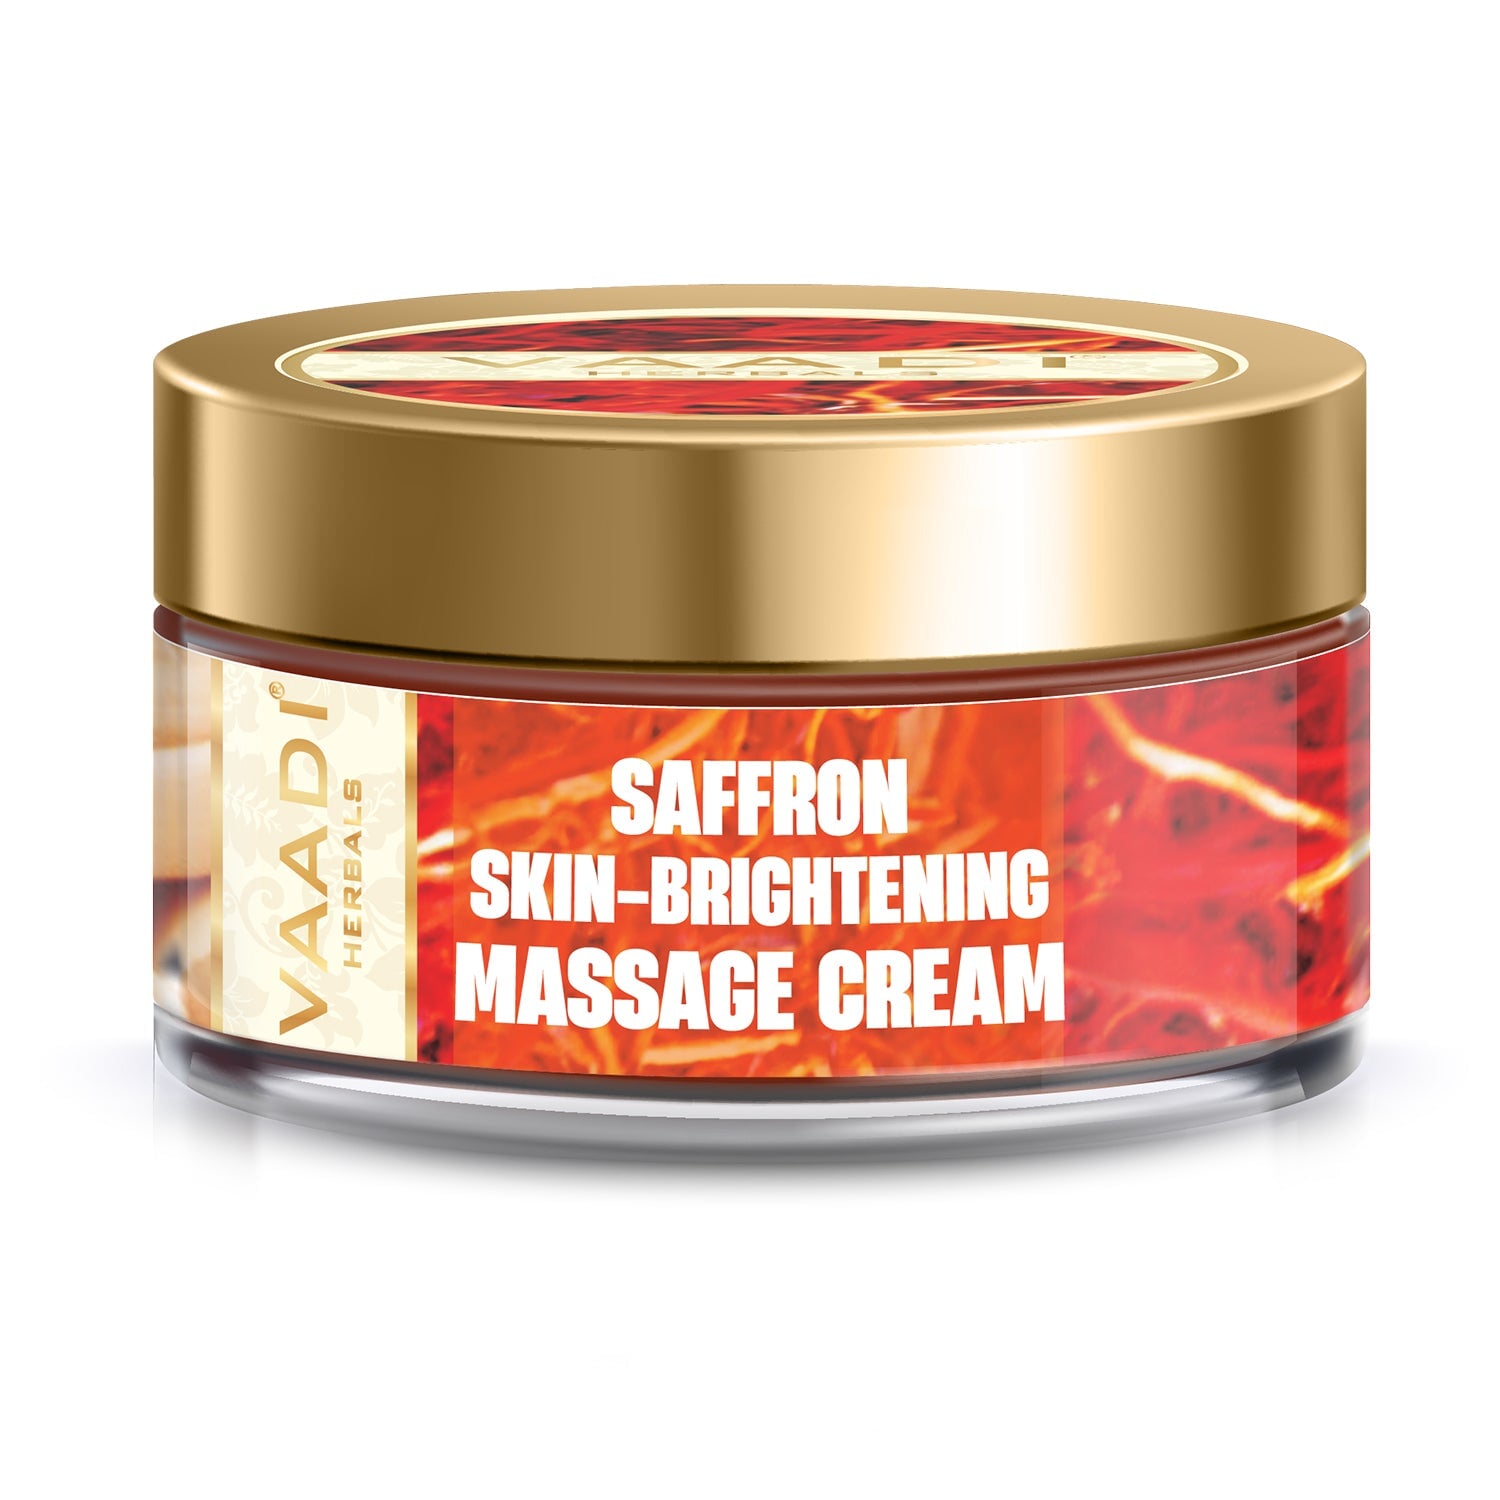 Skin Brightening Organic Saffron Massage Cream with Basil Oil & Shea Butter - Improves Complexion - Reduces Puffiness, Marks & Spots ( 50 gms/2 oz)